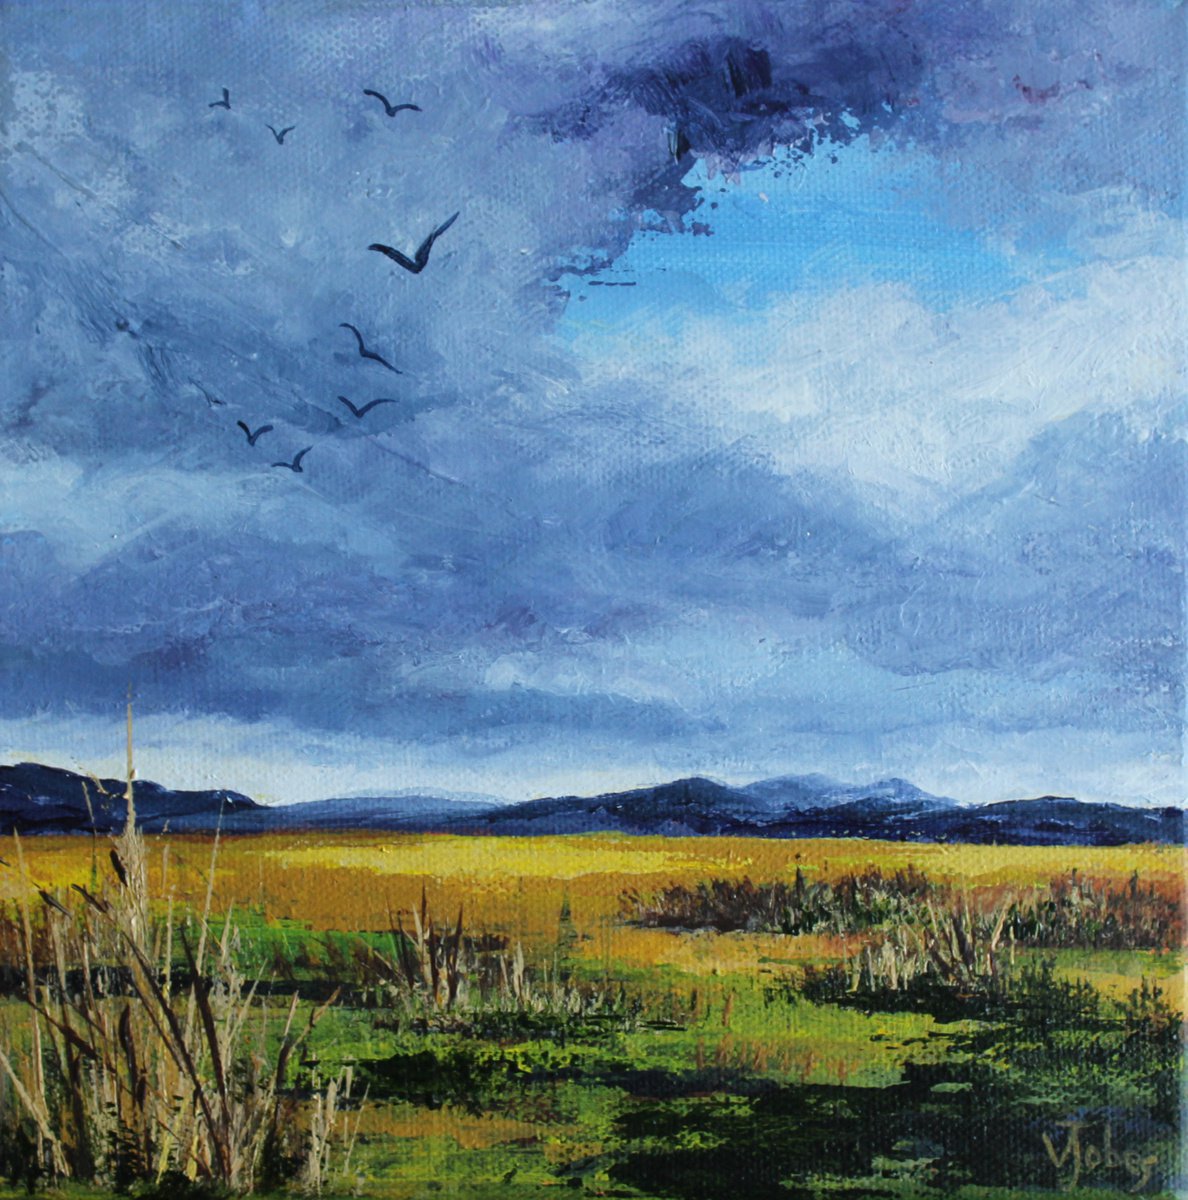 Storm Clouds over the Moor by Valerie Jobes